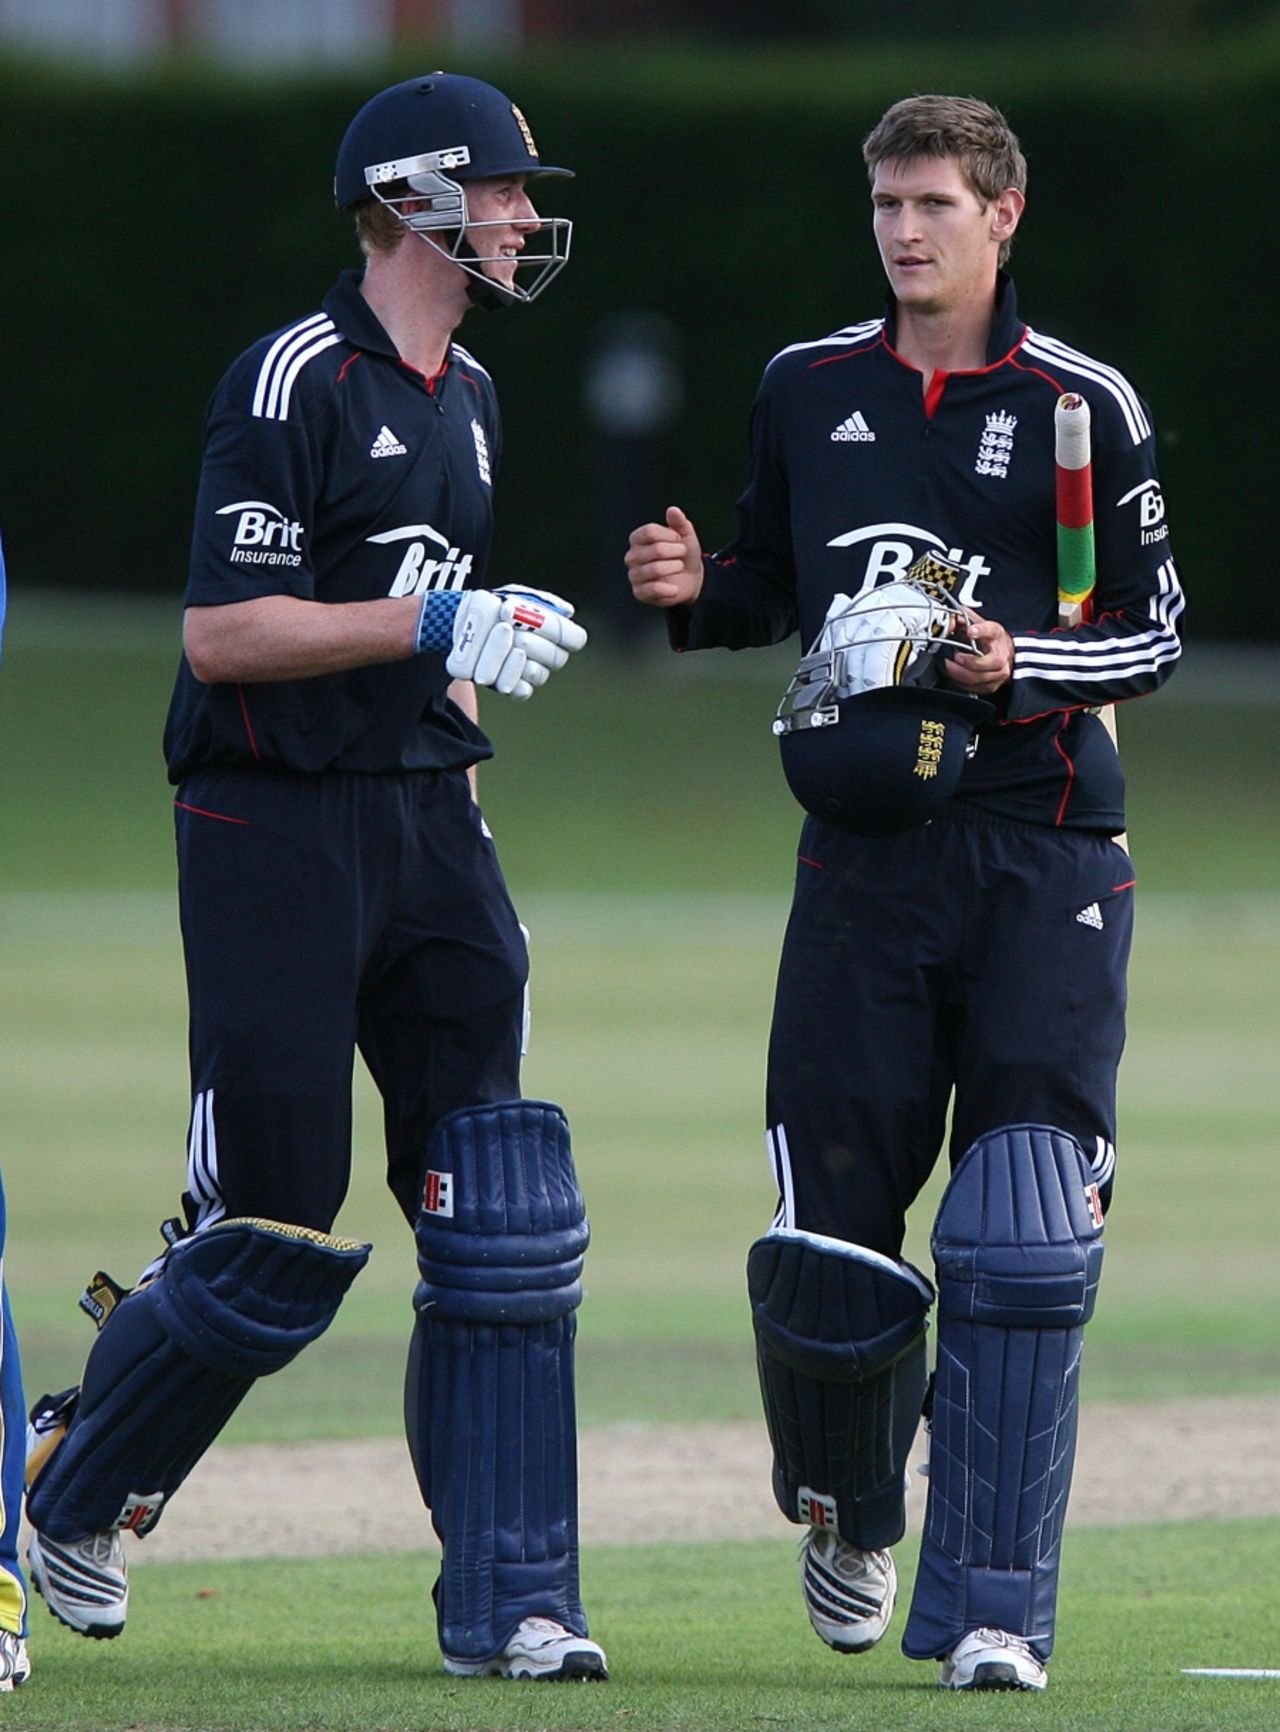 David Payne and Luke Wells sealed a tense, three-wicket win in the final over, England Under-19 v Sri Lanka Under-19, 1st ODI, Cambridge, August 7, 2010